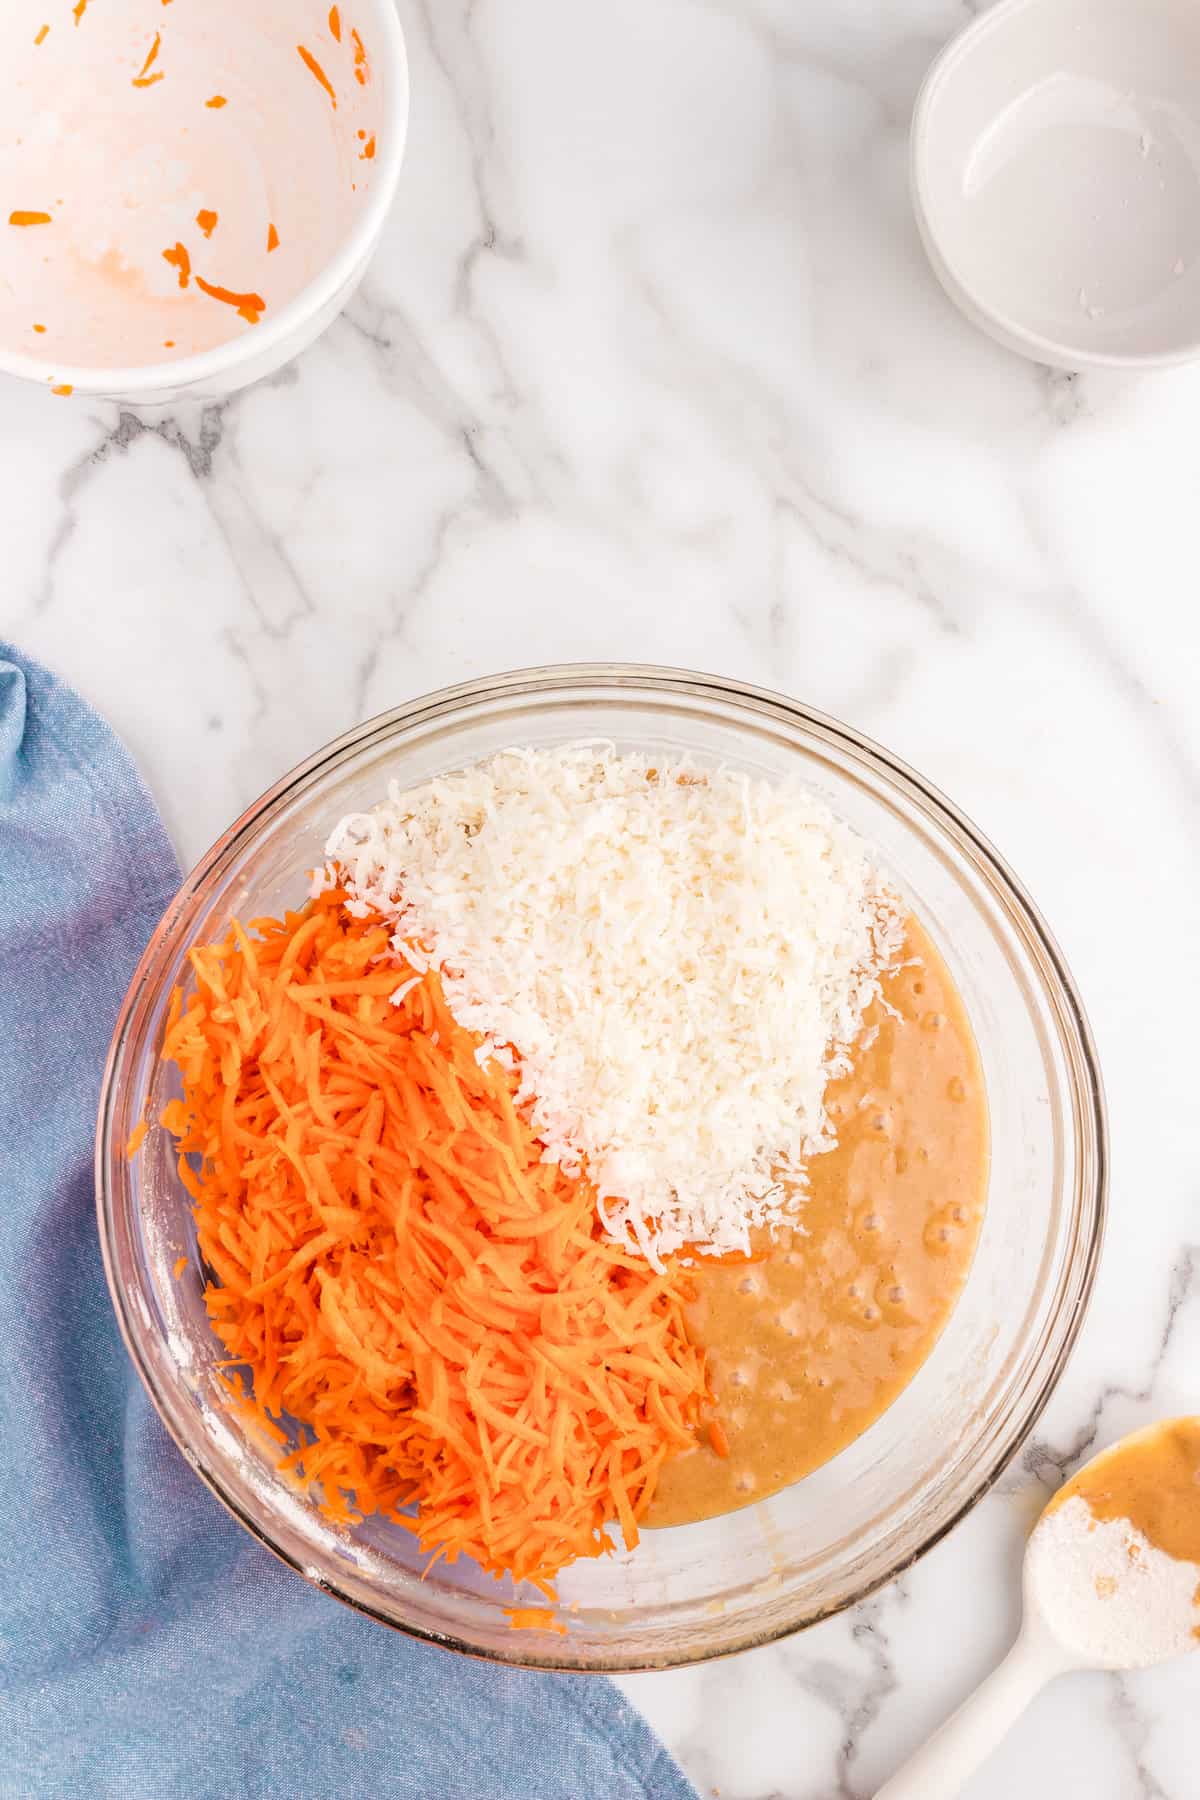 Adding Shredded Carrots and Dry Ingredients to Carrot Cake Batter in Mixing Bowl for Carrot Cake Receipe